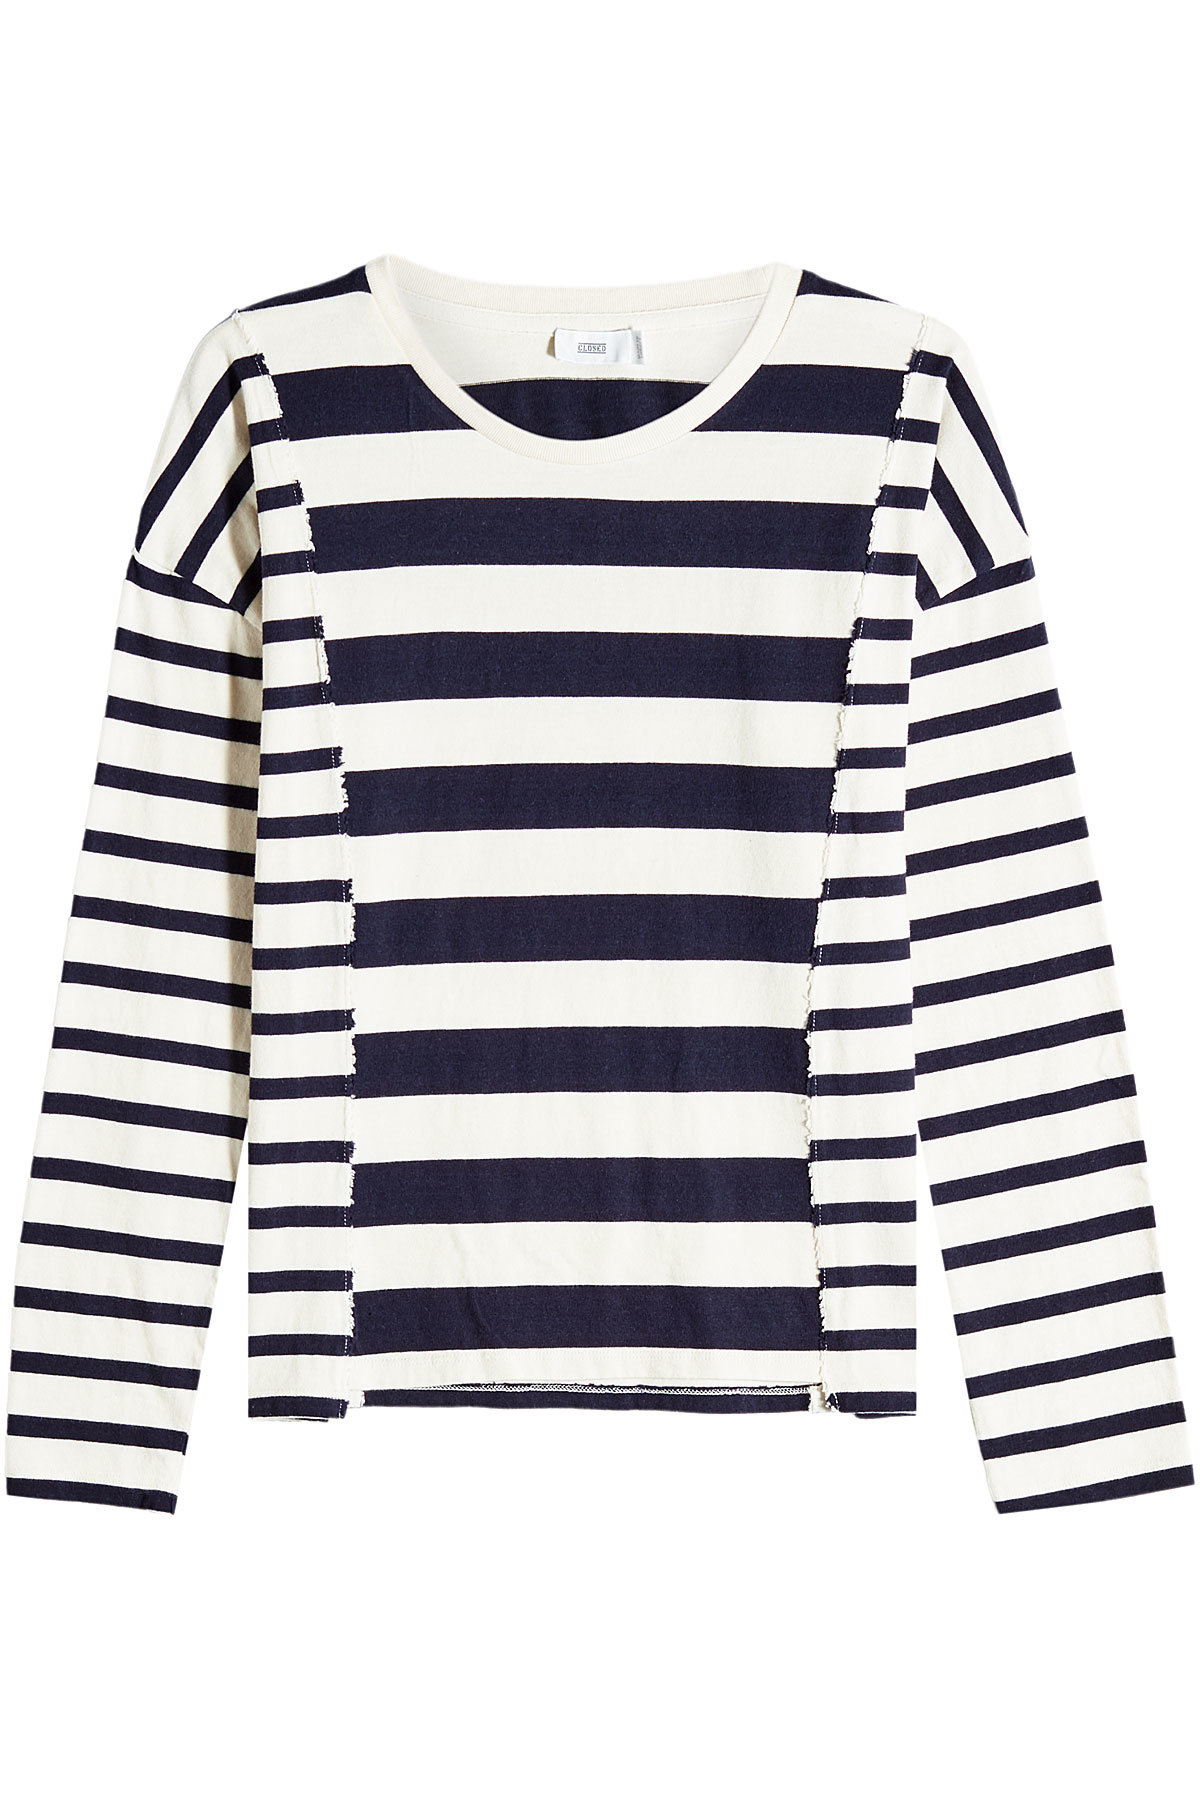 Closed - Patchwork Striped Cotton Top